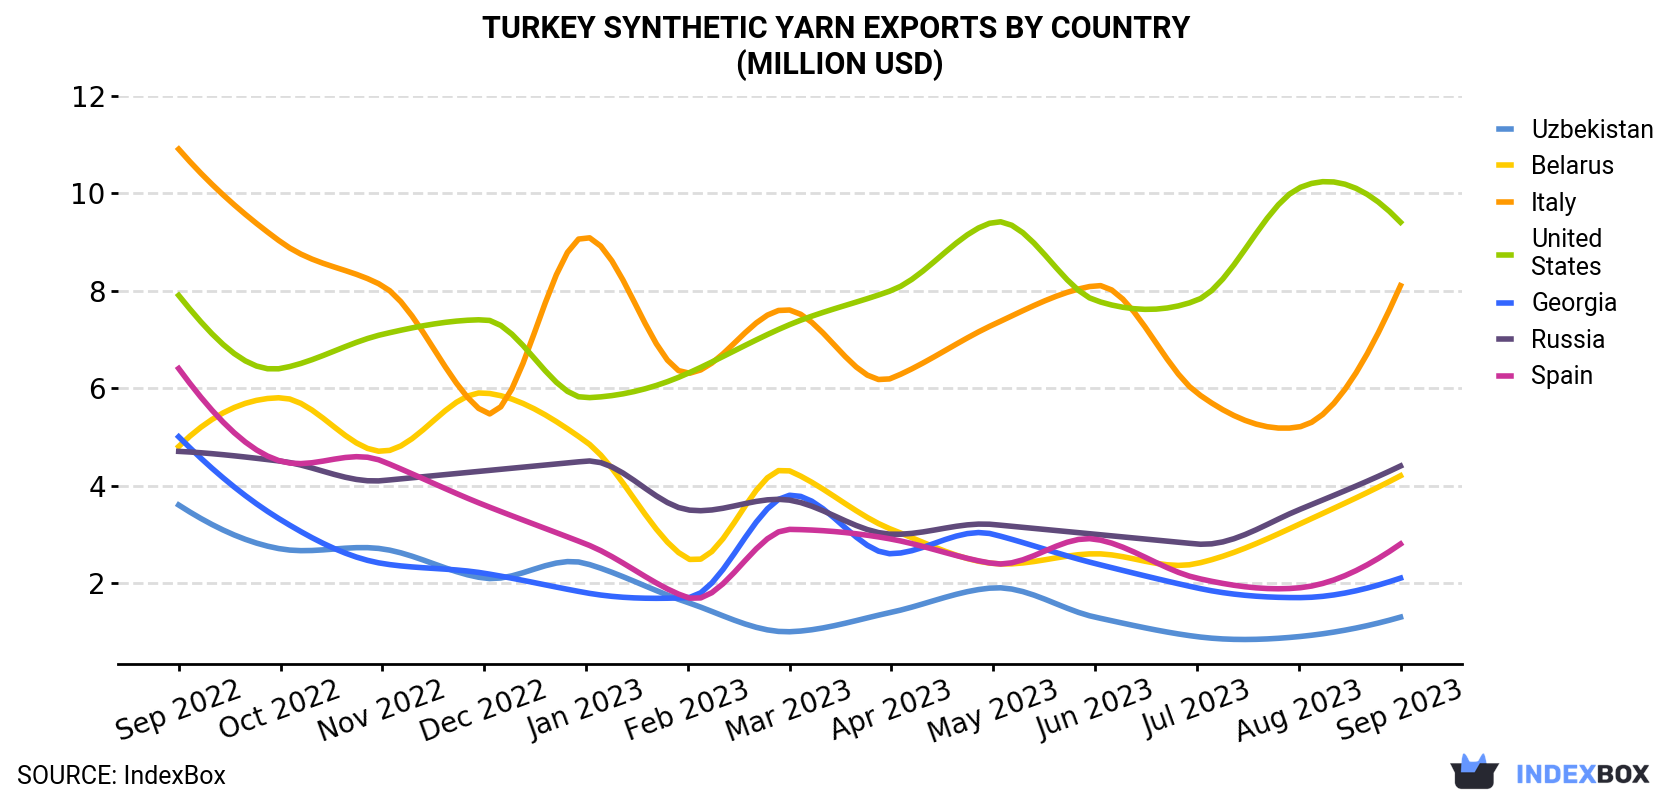 Turkey Synthetic Yarn Exports By Country (Million USD)